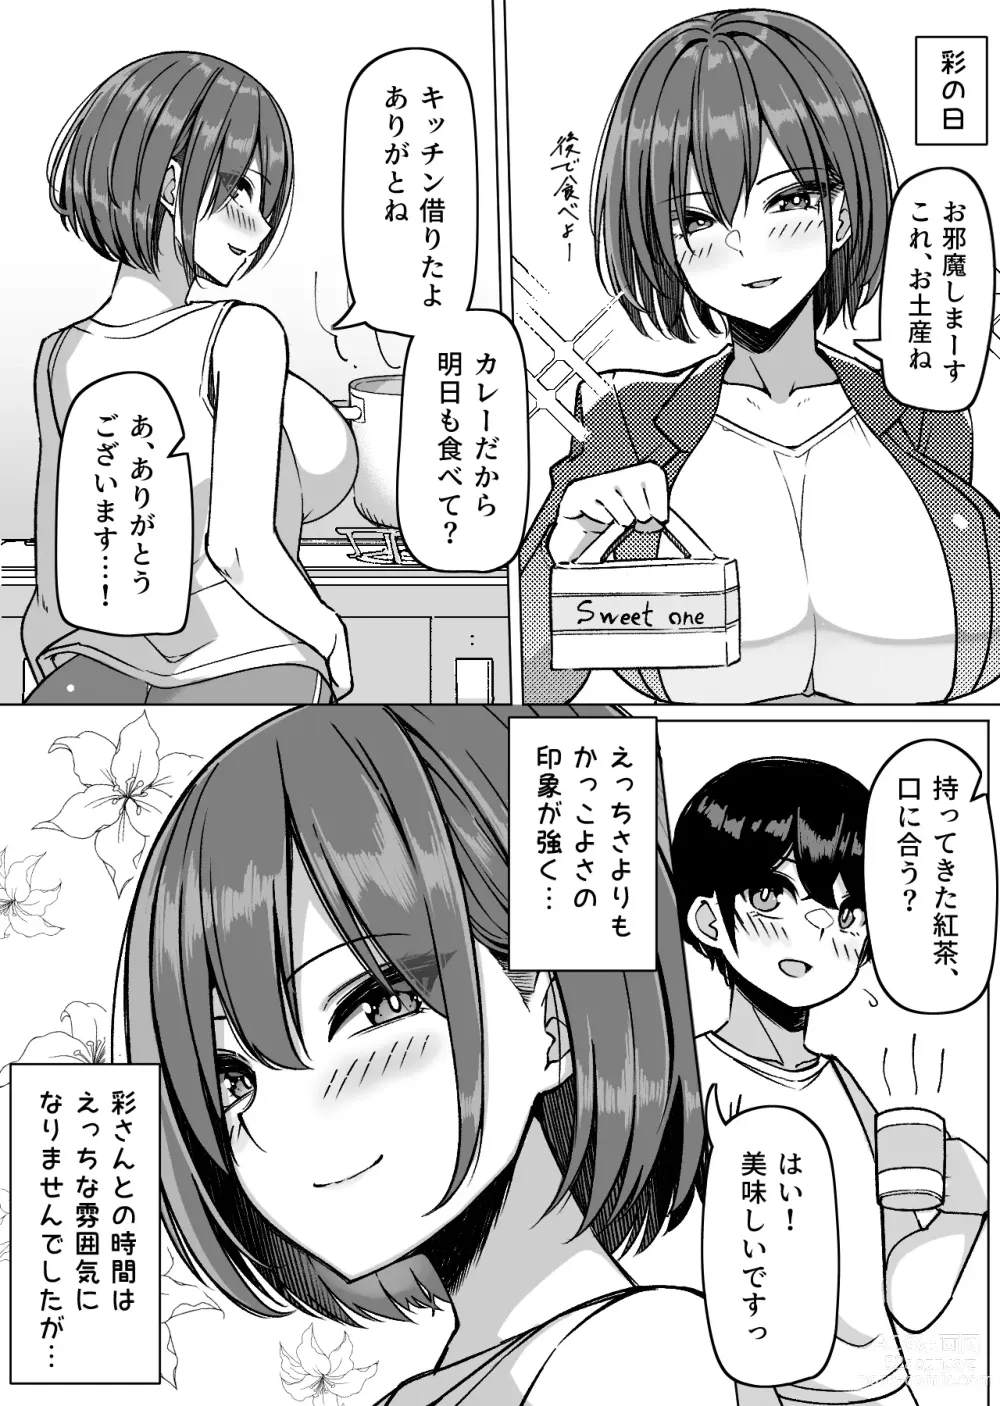 Page 13 of doujinshi Daily Sleepover With Big-breasted Girls